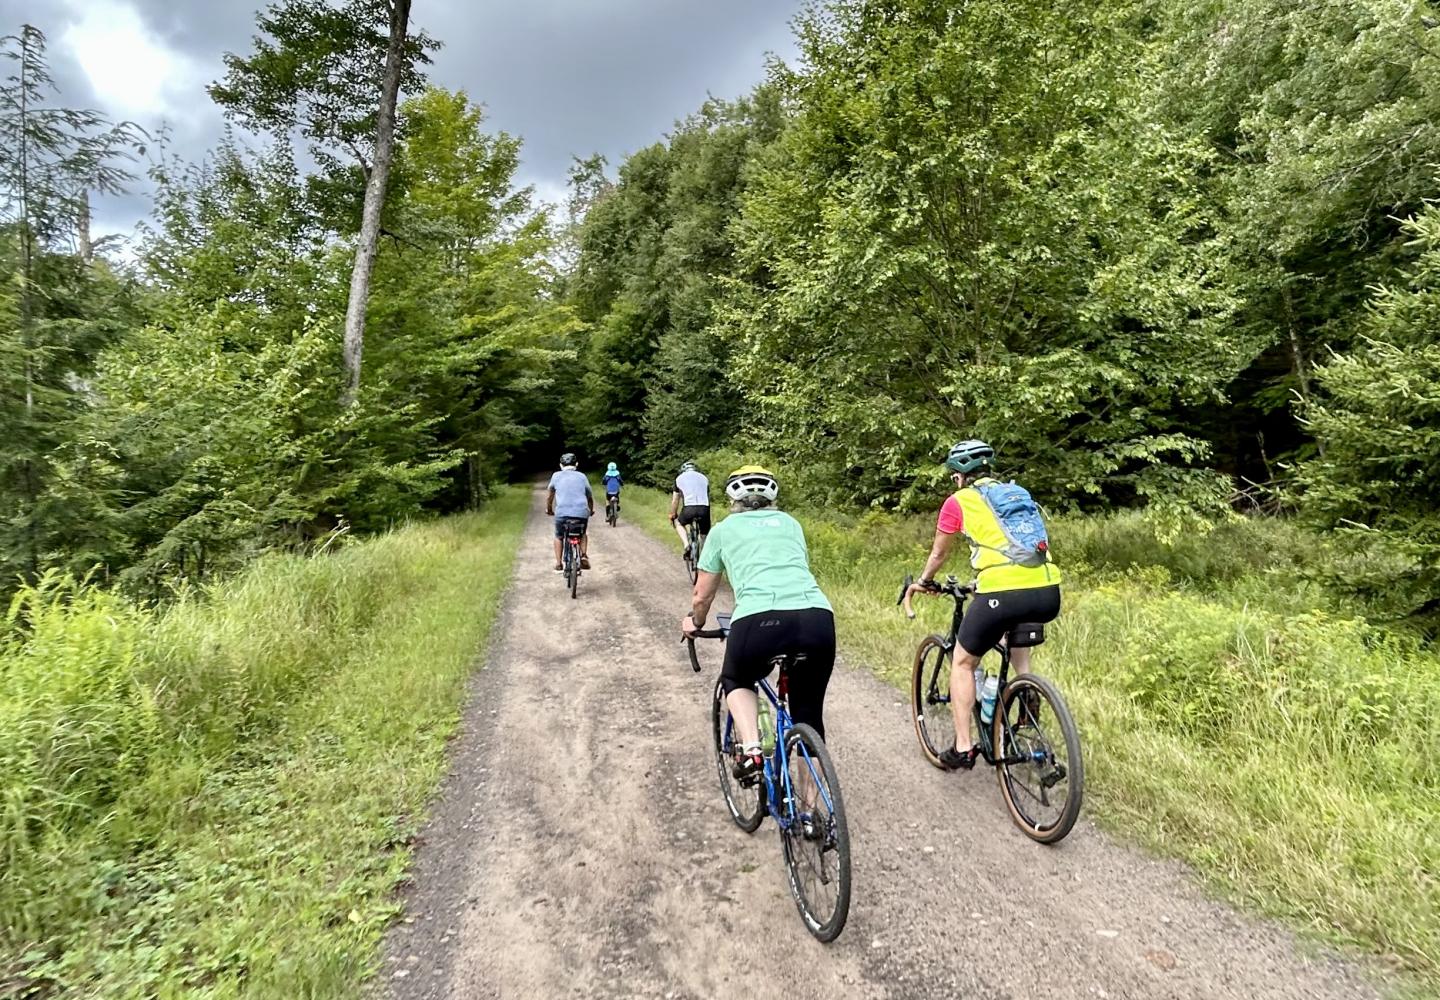 The Great Camp Sagamore Experience is two days of fabulous gravel cycling while staying in a historic great camp.